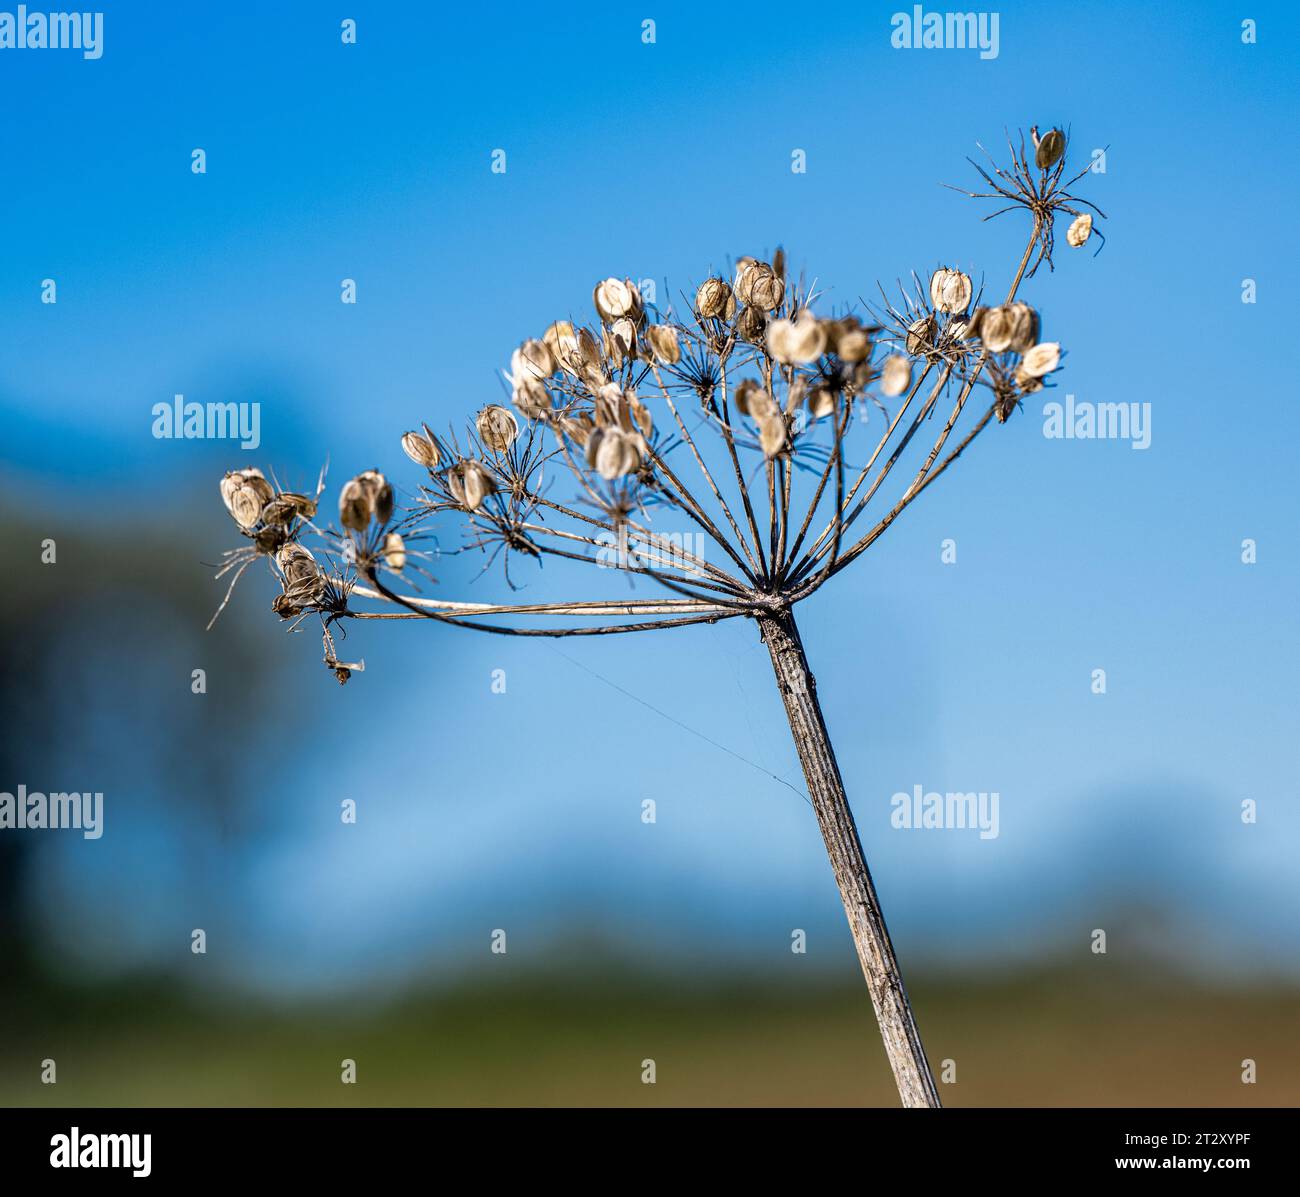 The head of a Giant Hogweed (Heracleum mantegazzianum) plant showing the seeds on a cold winter’s day against a clear blue winter sky Stock Photo